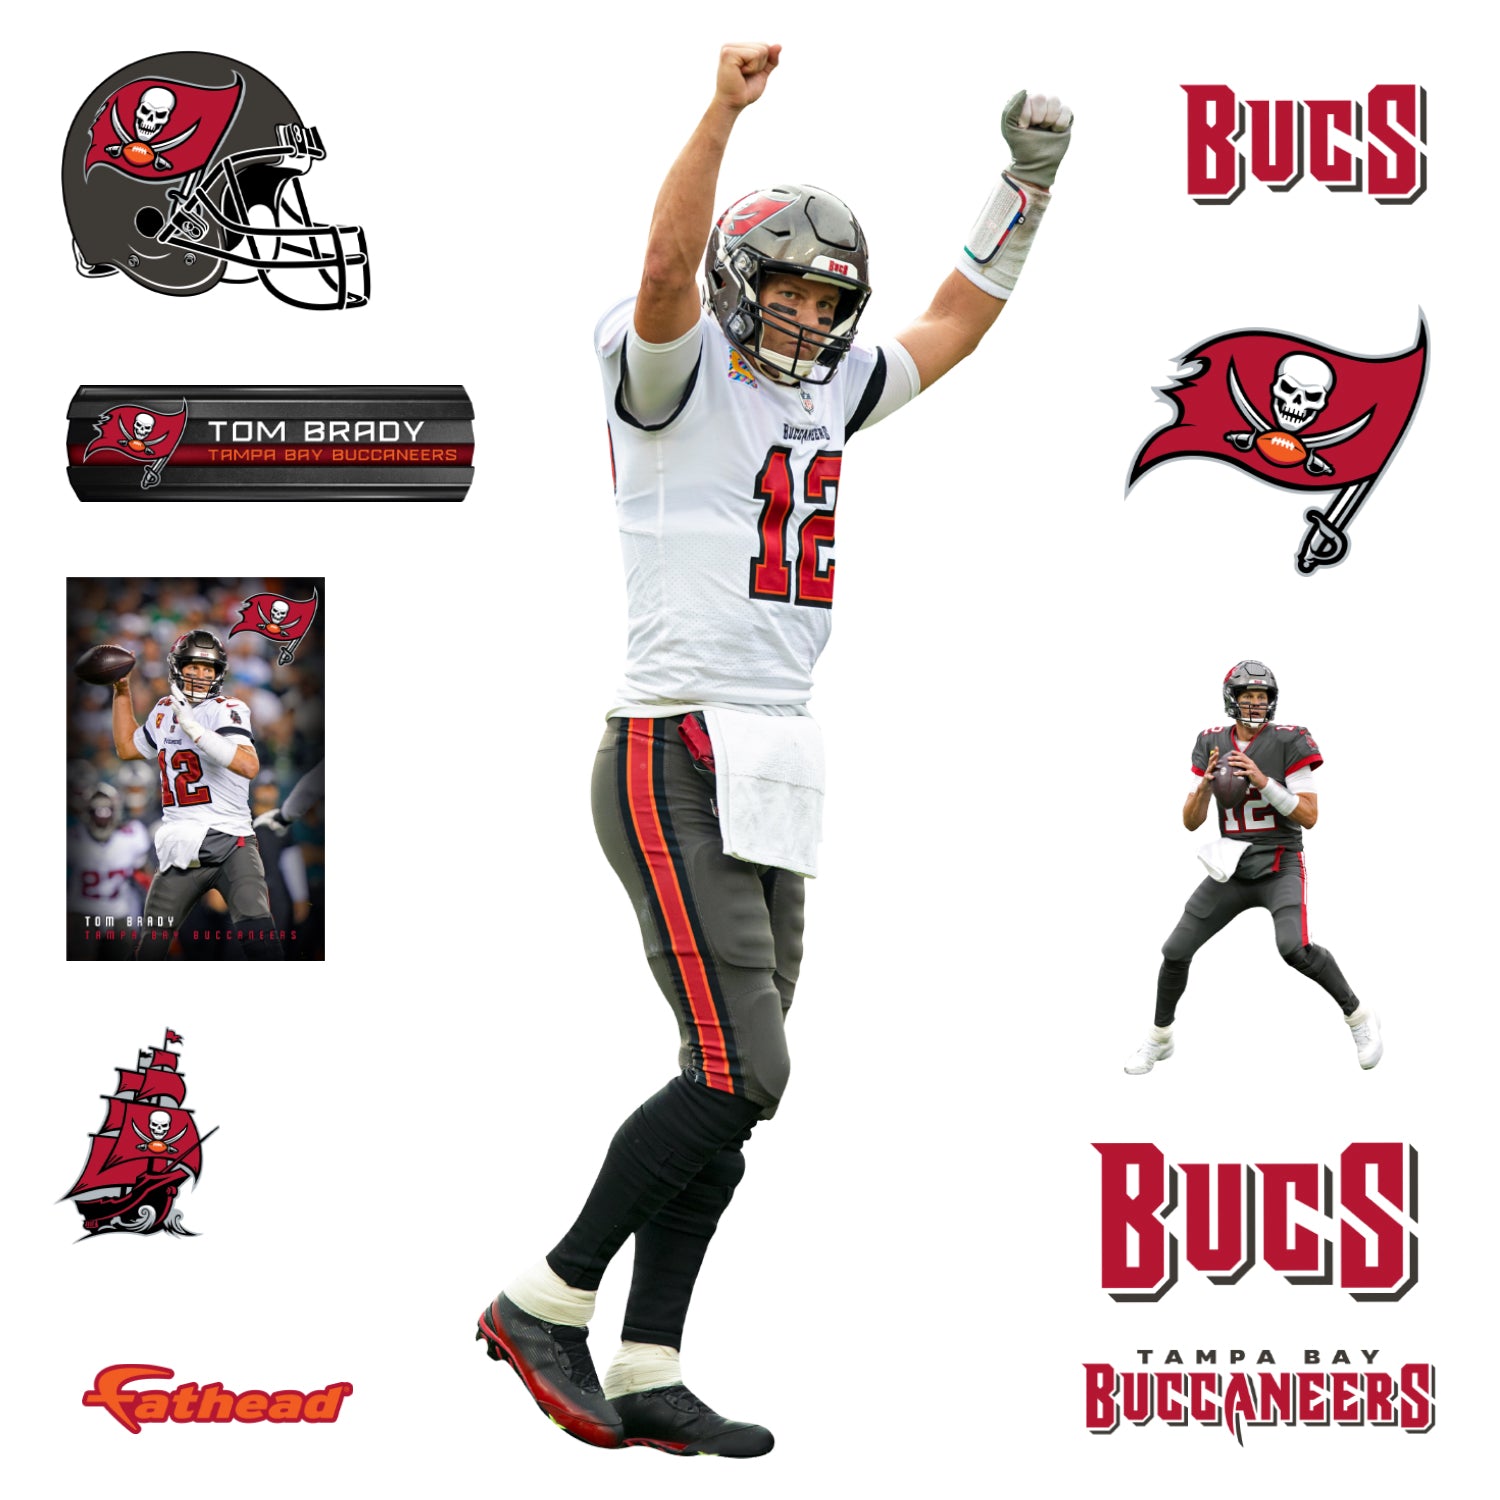 Fathead Tom Brady Tampa Bay Buccaneers Alumigraphic Outdoor Die-Cut Decal